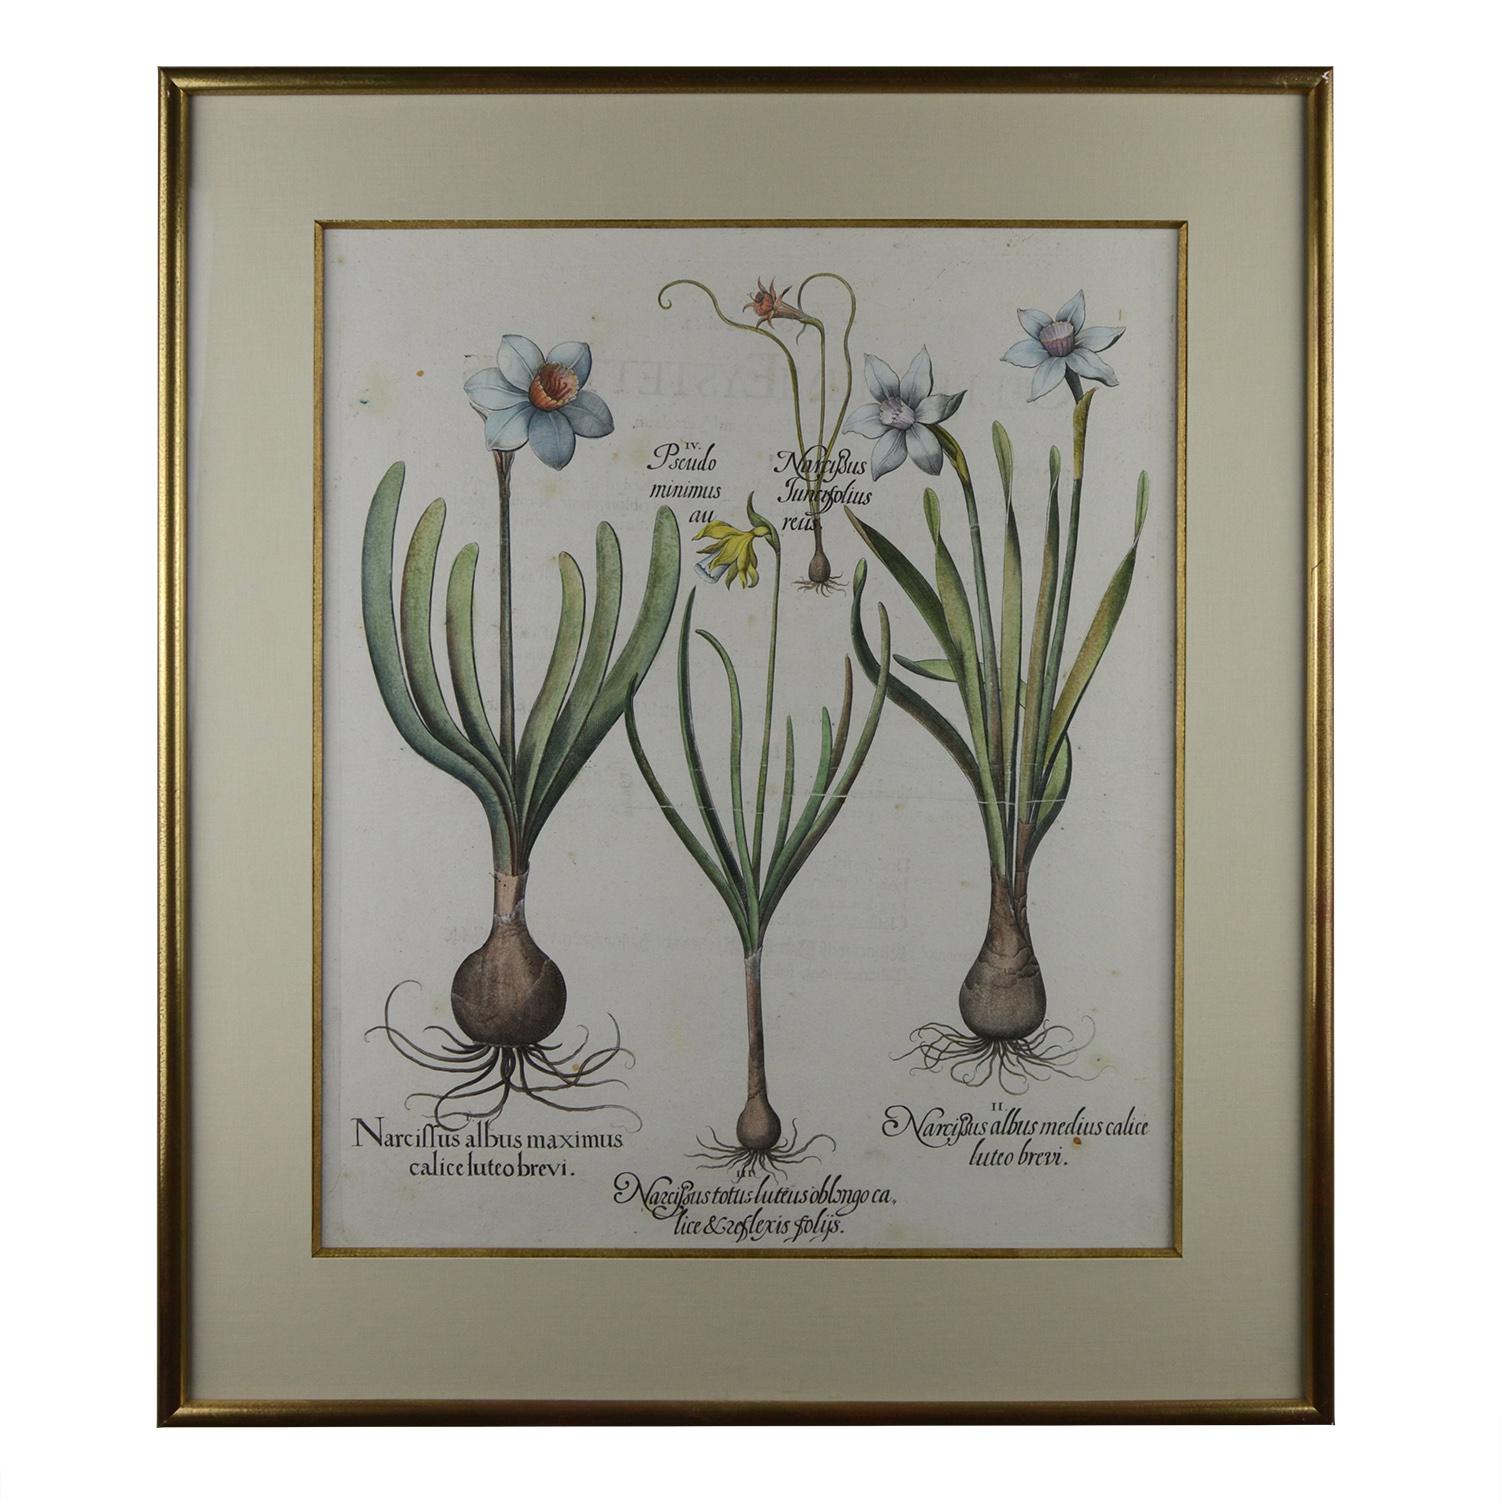 Daffodil, Star-of-Bethlehem, Hyacinth.

When Johann Konrad von Gemmingen, Prince Bishop of Eichstaedt (a place about 60 kilometers north of Munich) gave the Nuremberg apothecary and botanist Basilius Besler (1561-1629) the order to publish a book